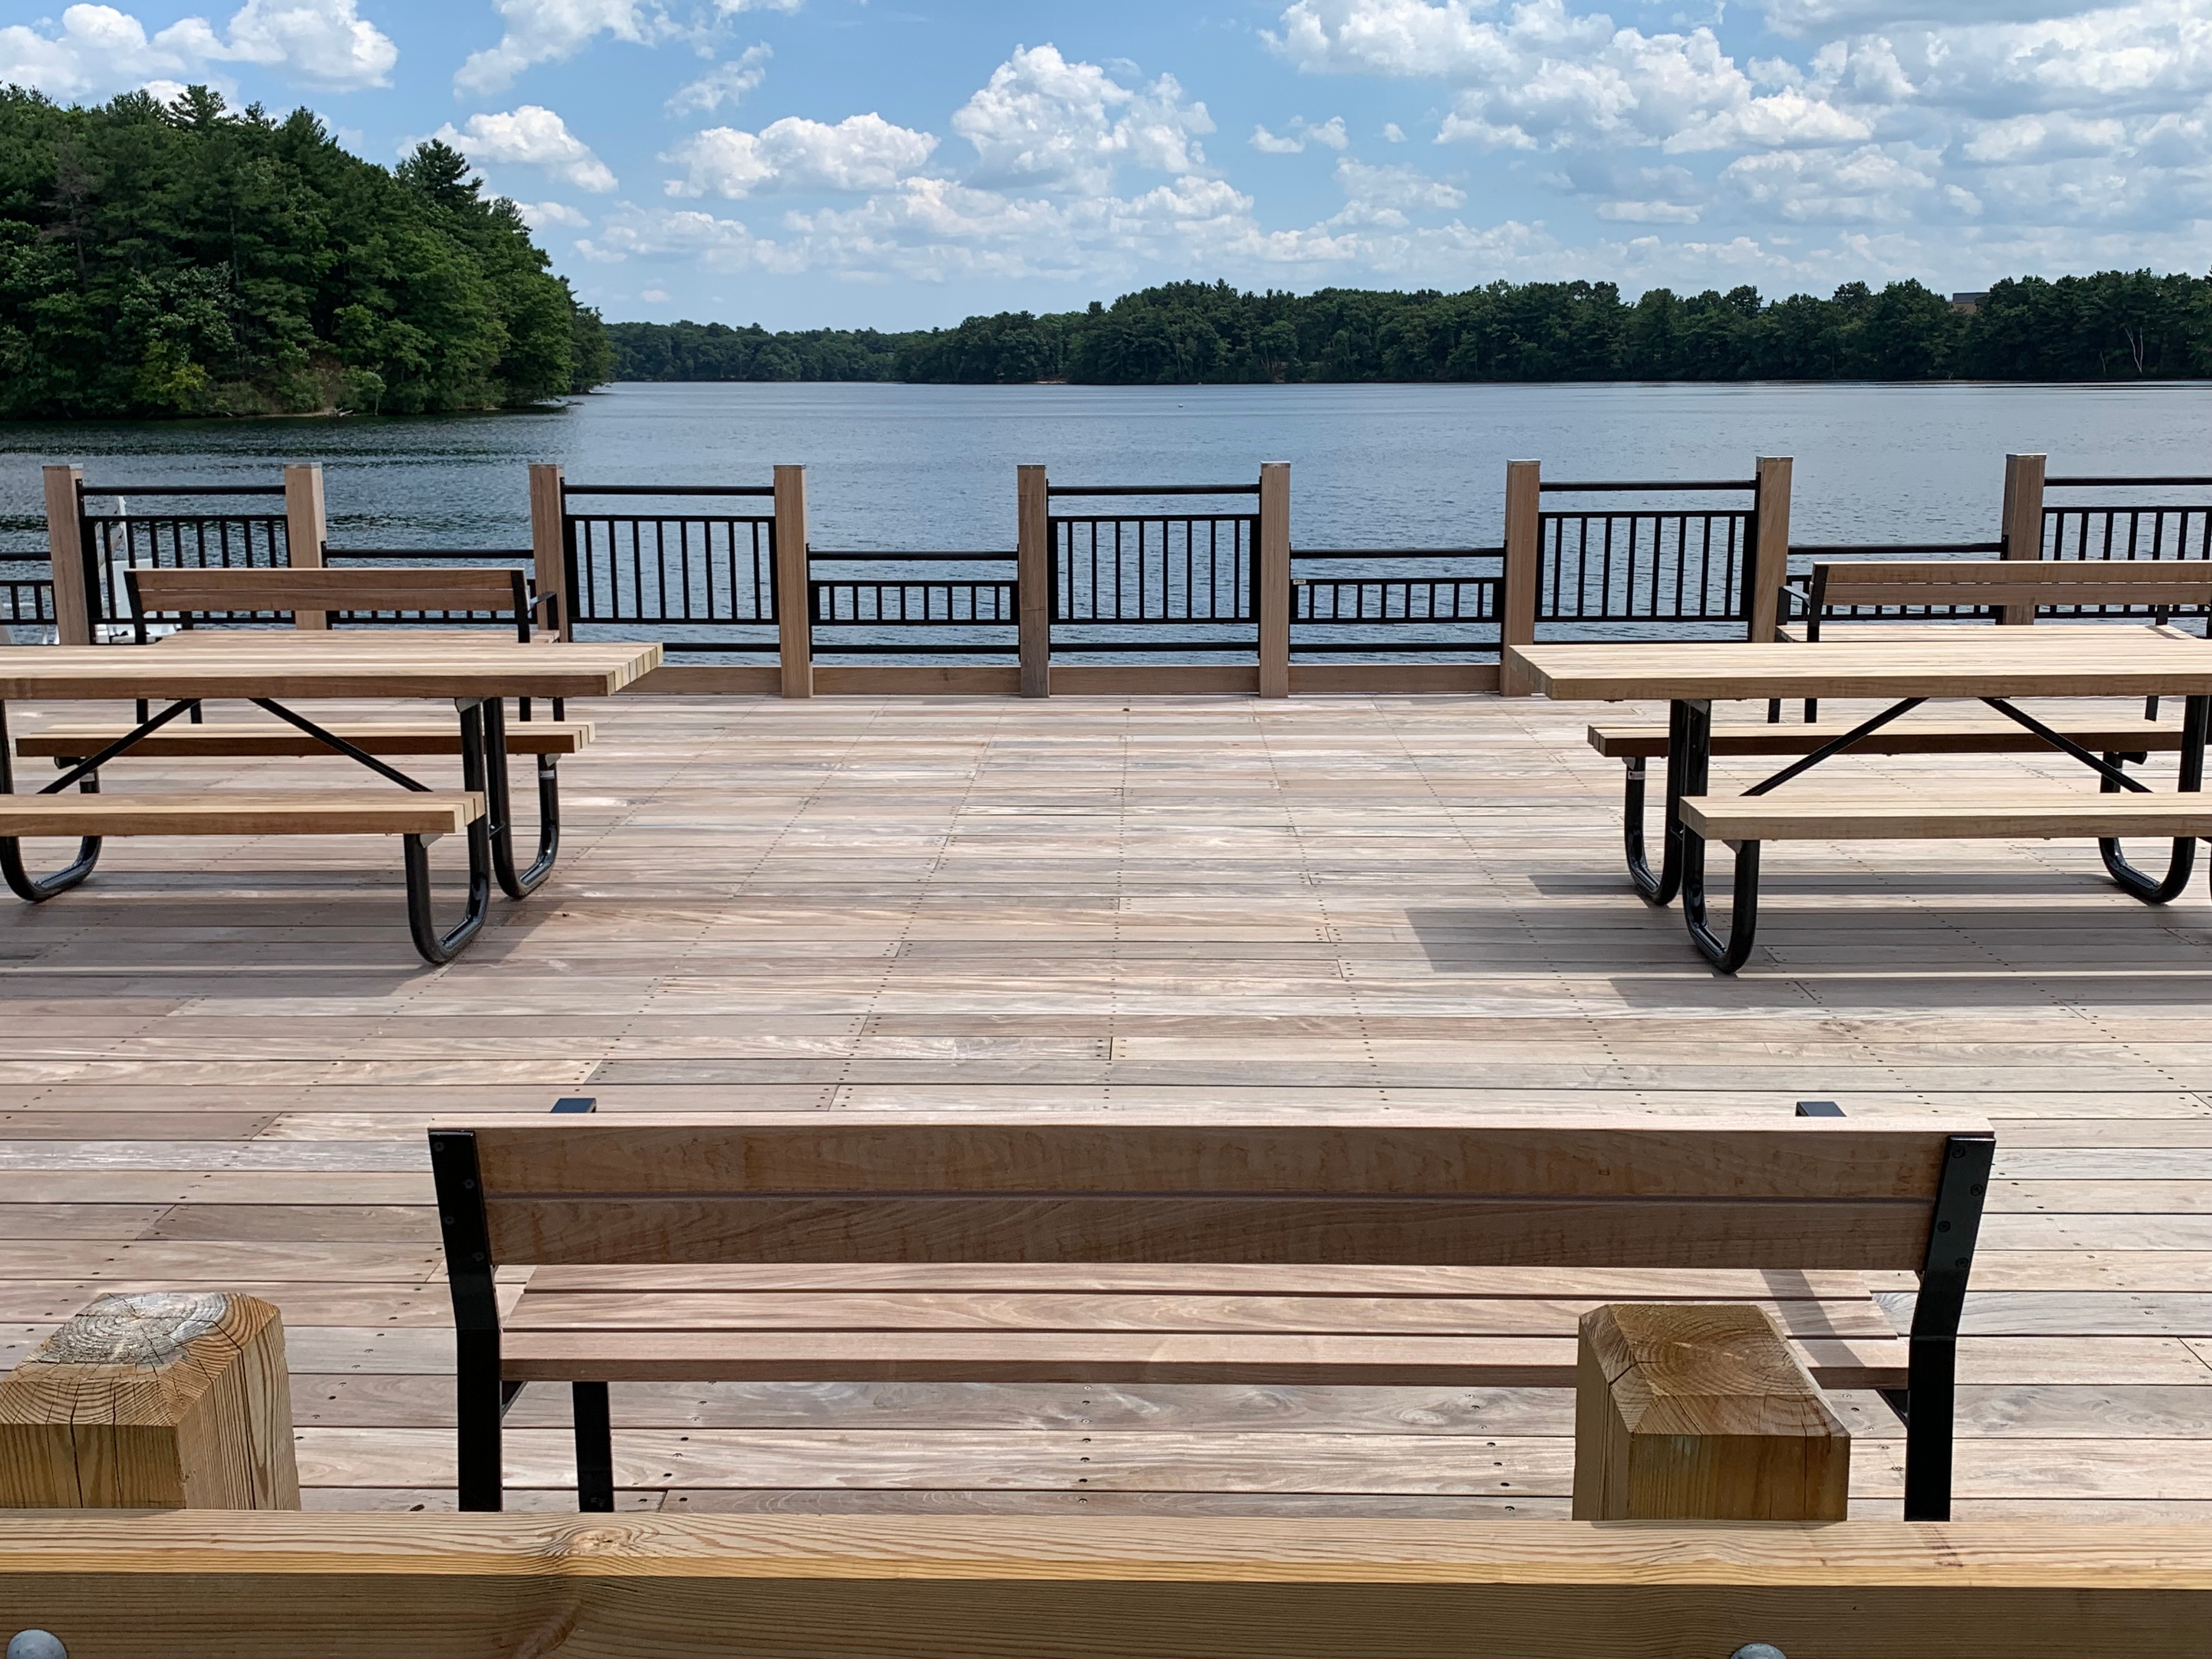 A large wooden deck looks out over a lake surrounded by trees. There are a bench and two accessible picnic tables on the deck. Every other section of the deck railing is lowered.